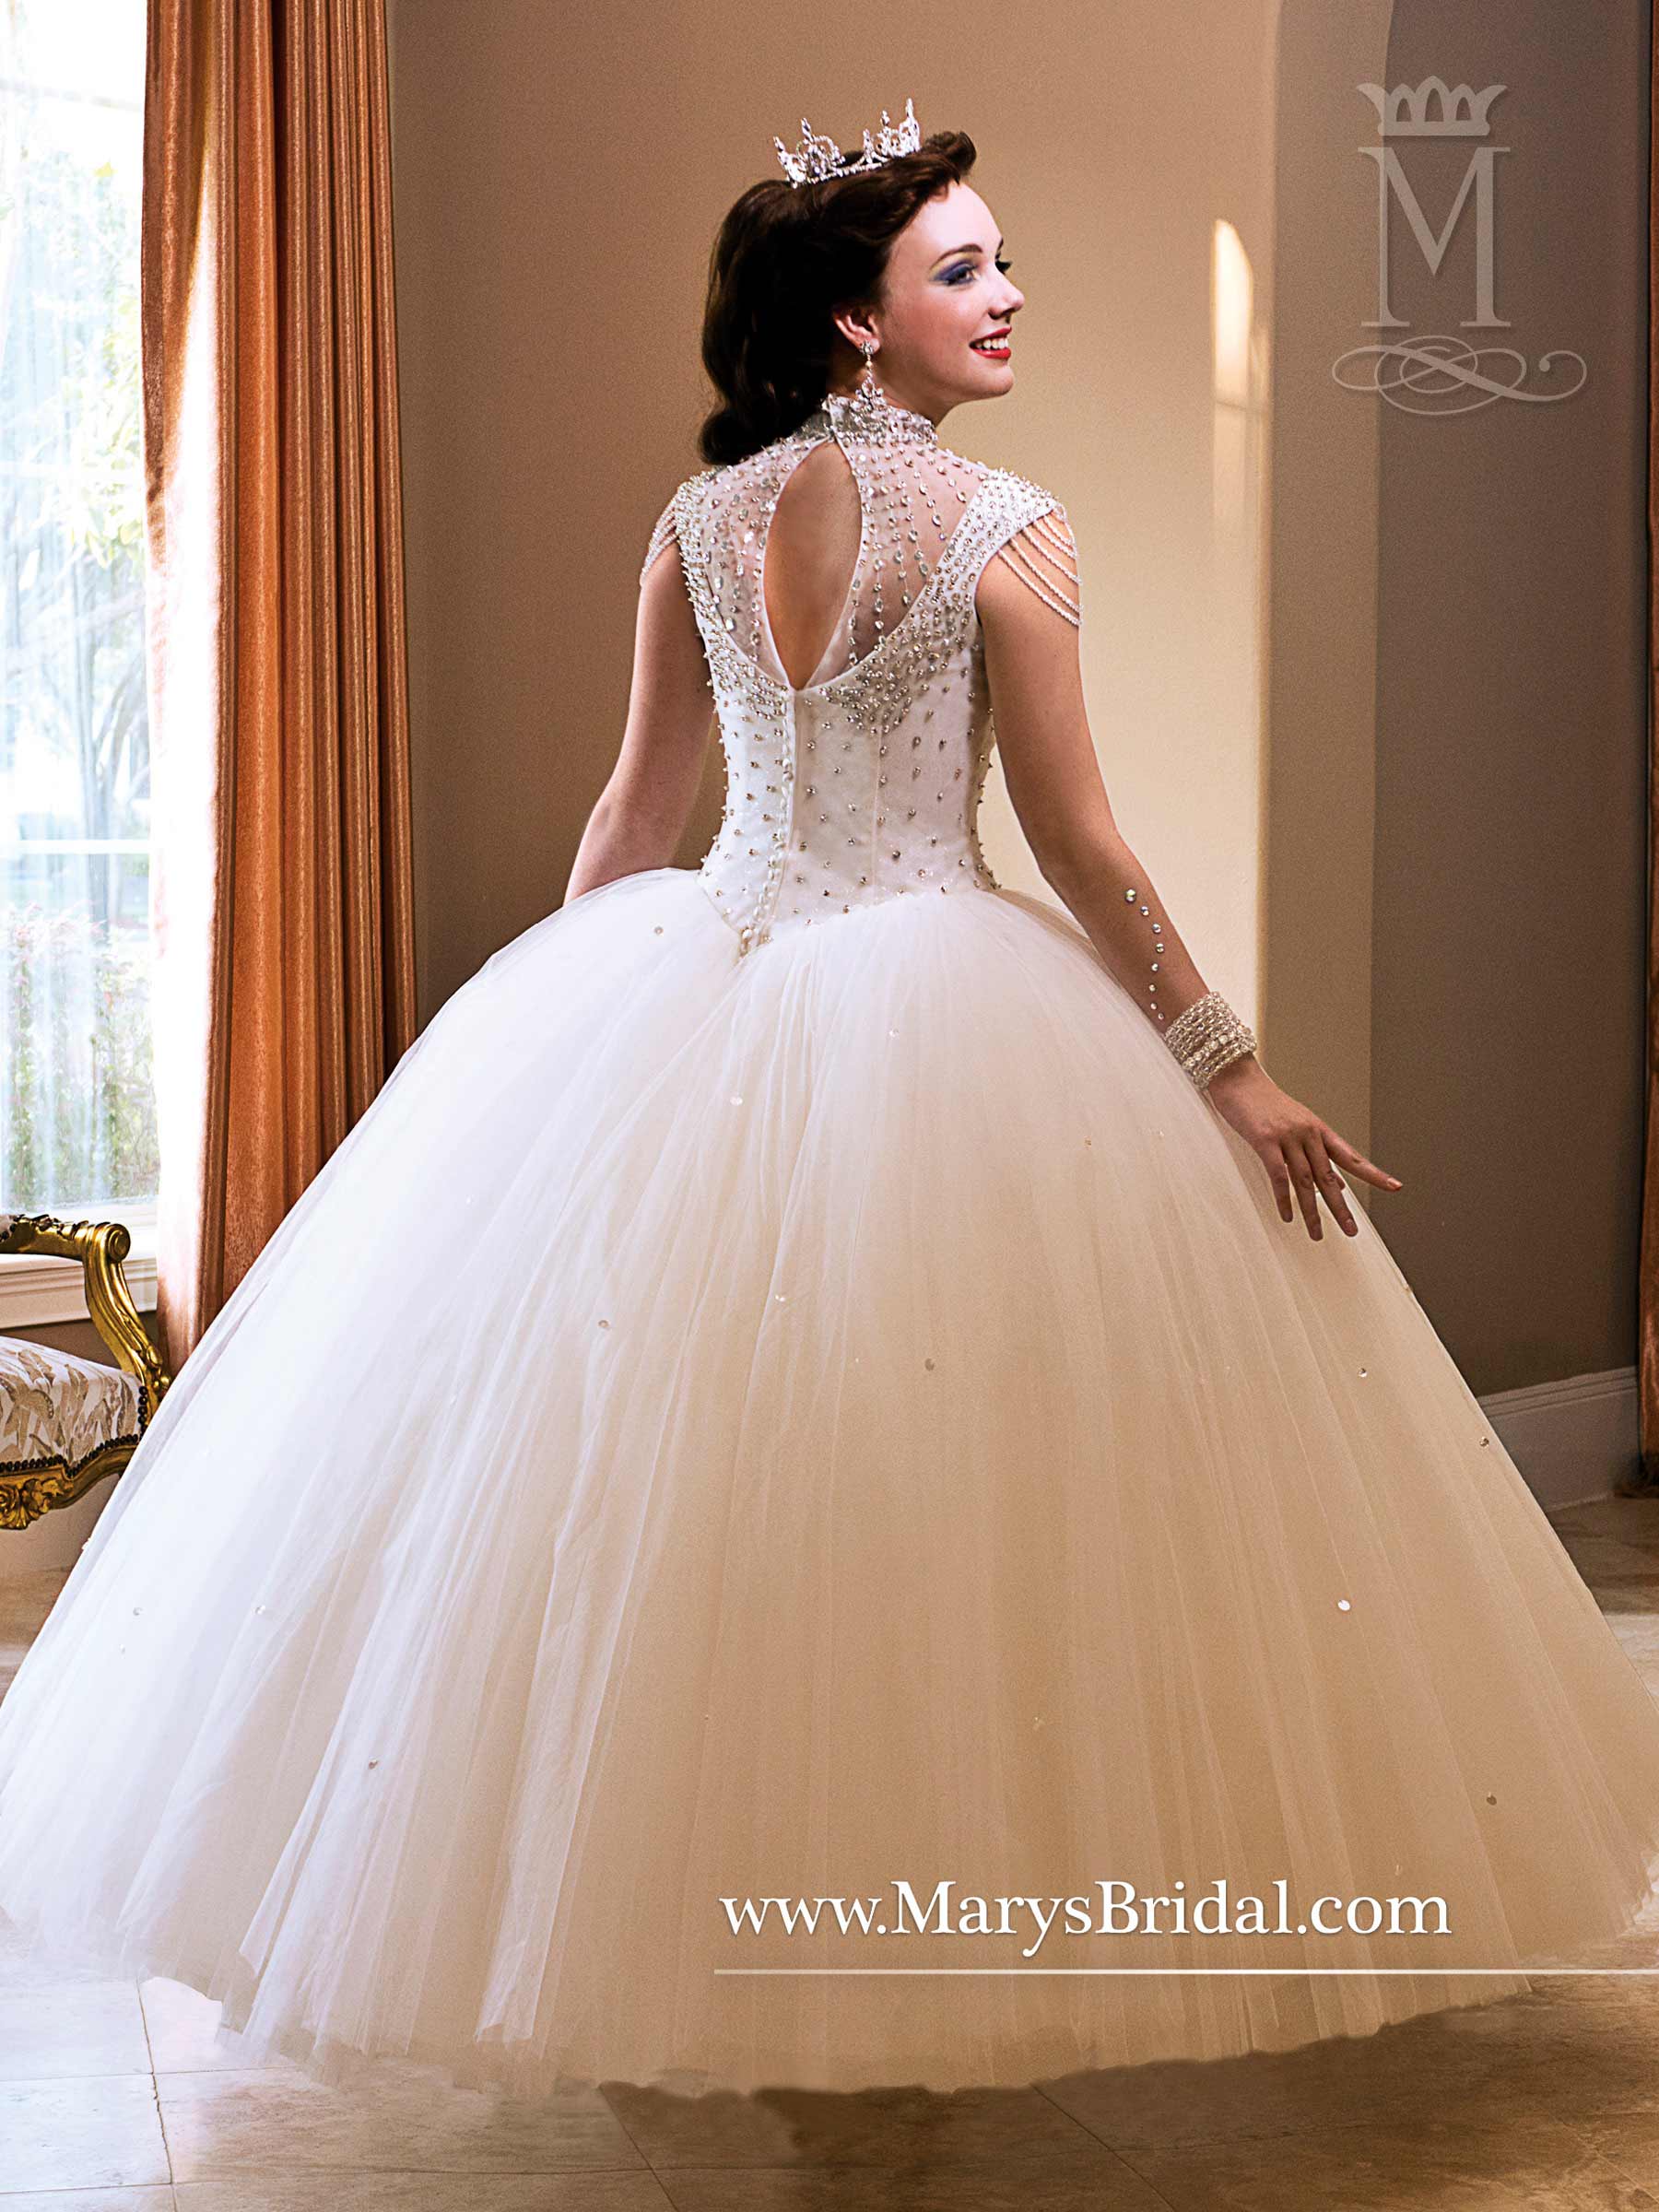 Princess themed quinceañera dresses, a woman in a Quinceanera dress standing in a room